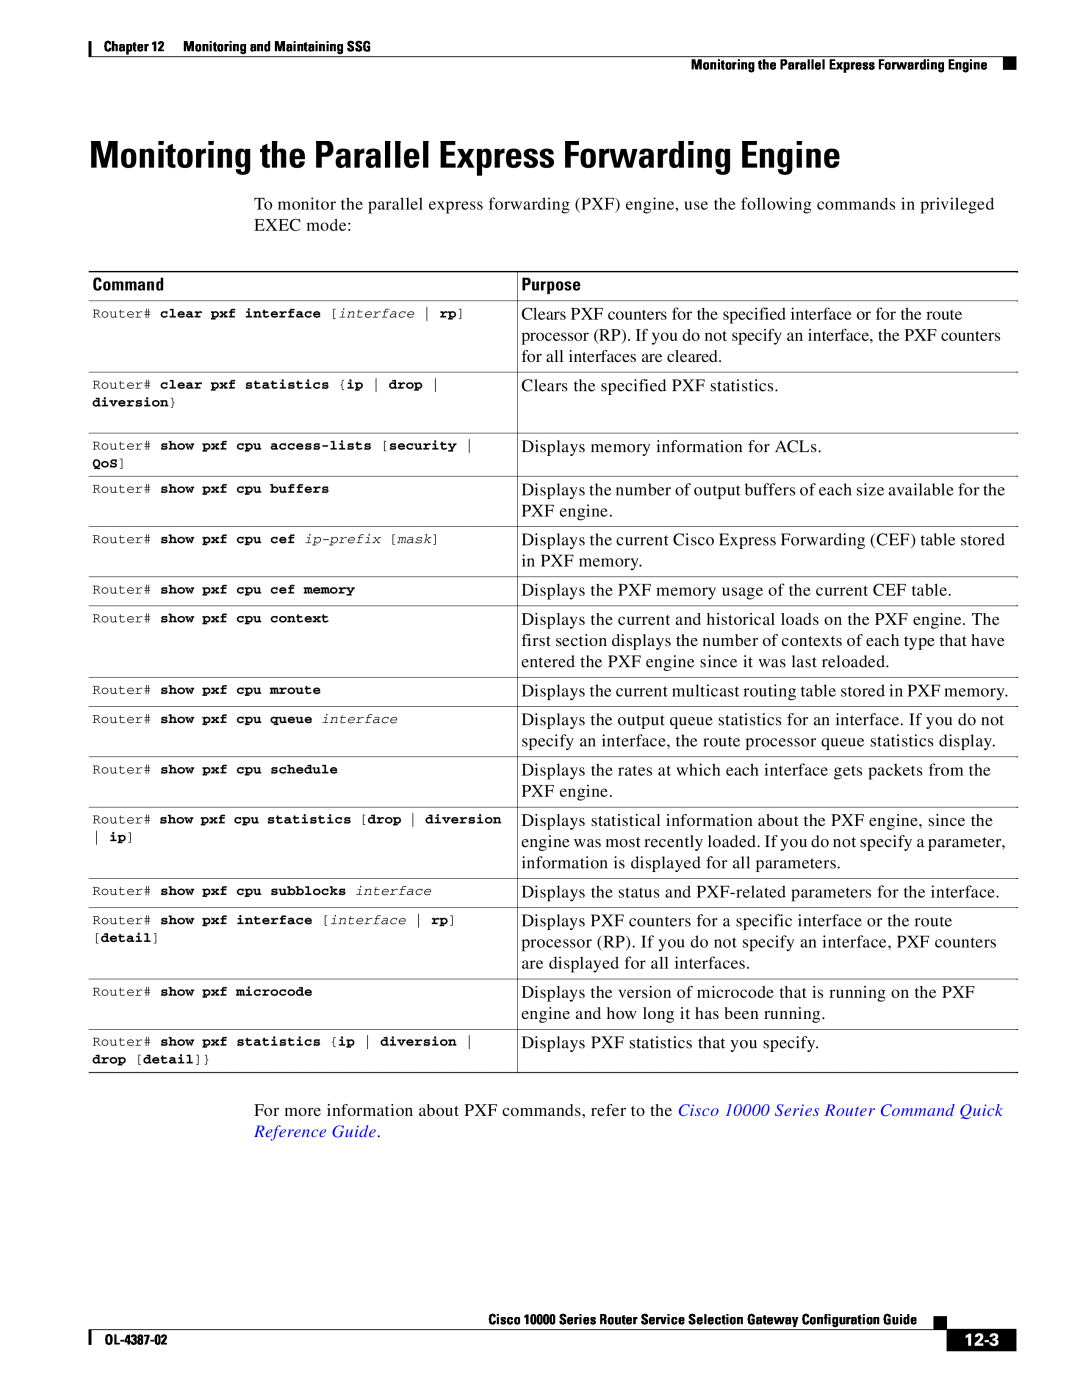 Cisco Systems OL-4387-02 manual Monitoring the Parallel Express Forwarding Engine, Reference Guide, 12-3, Command, Purpose 